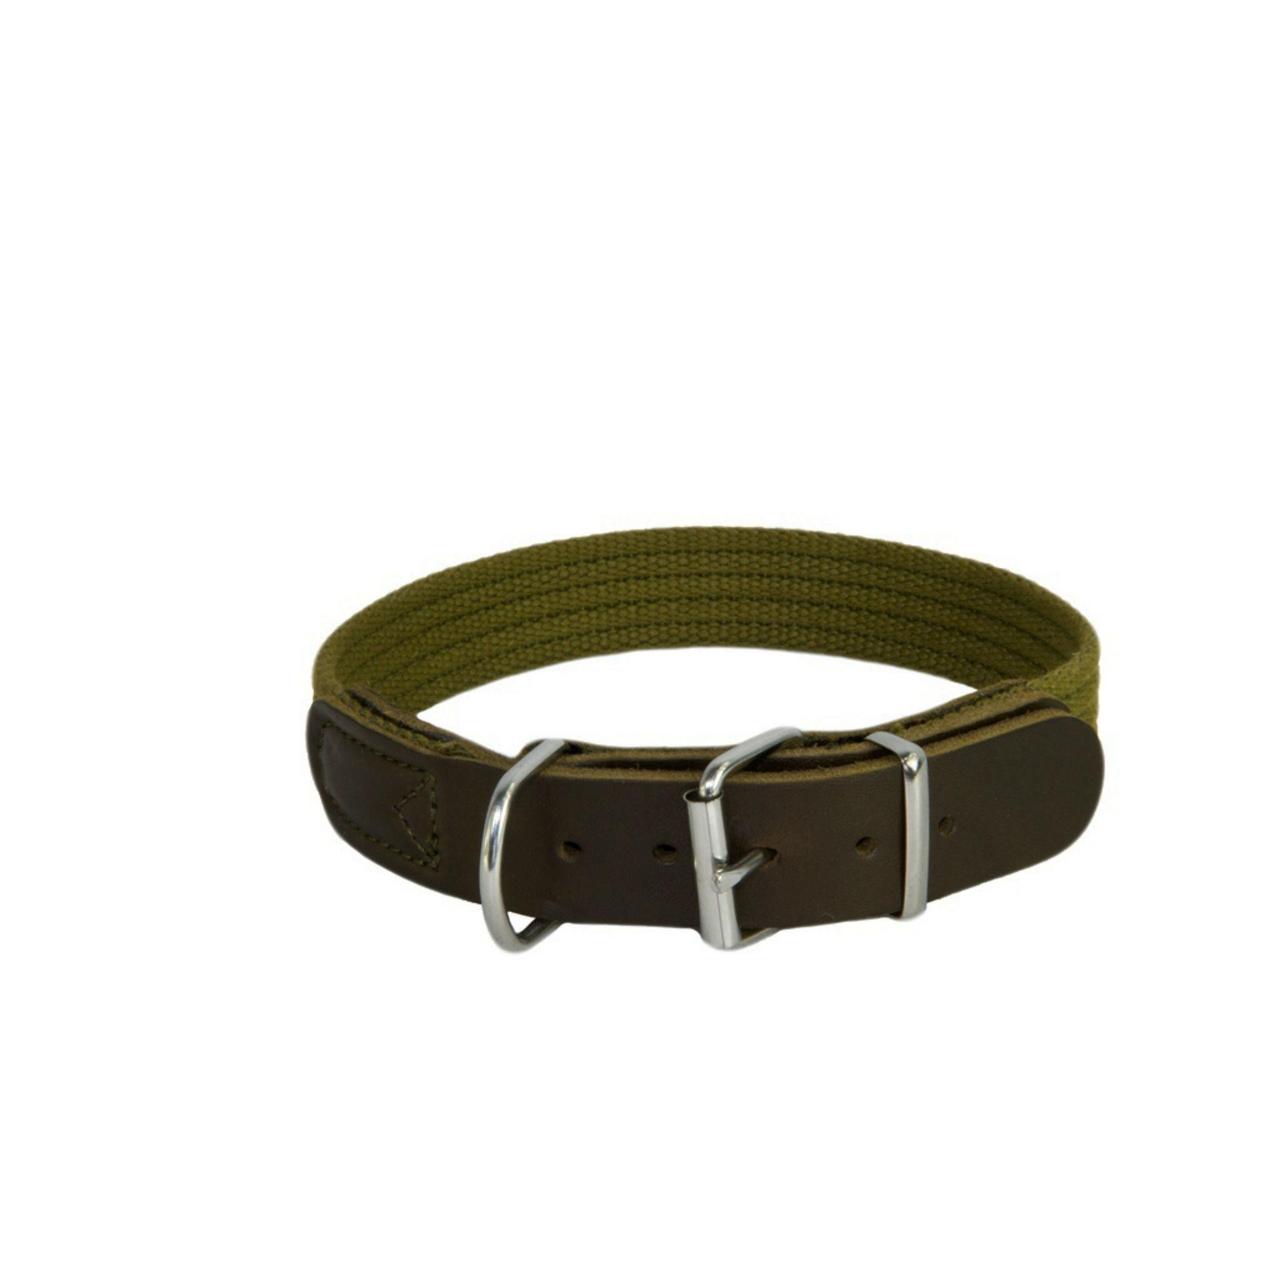 An image of Earthbound Cotton Green Collar 31 - 37cm